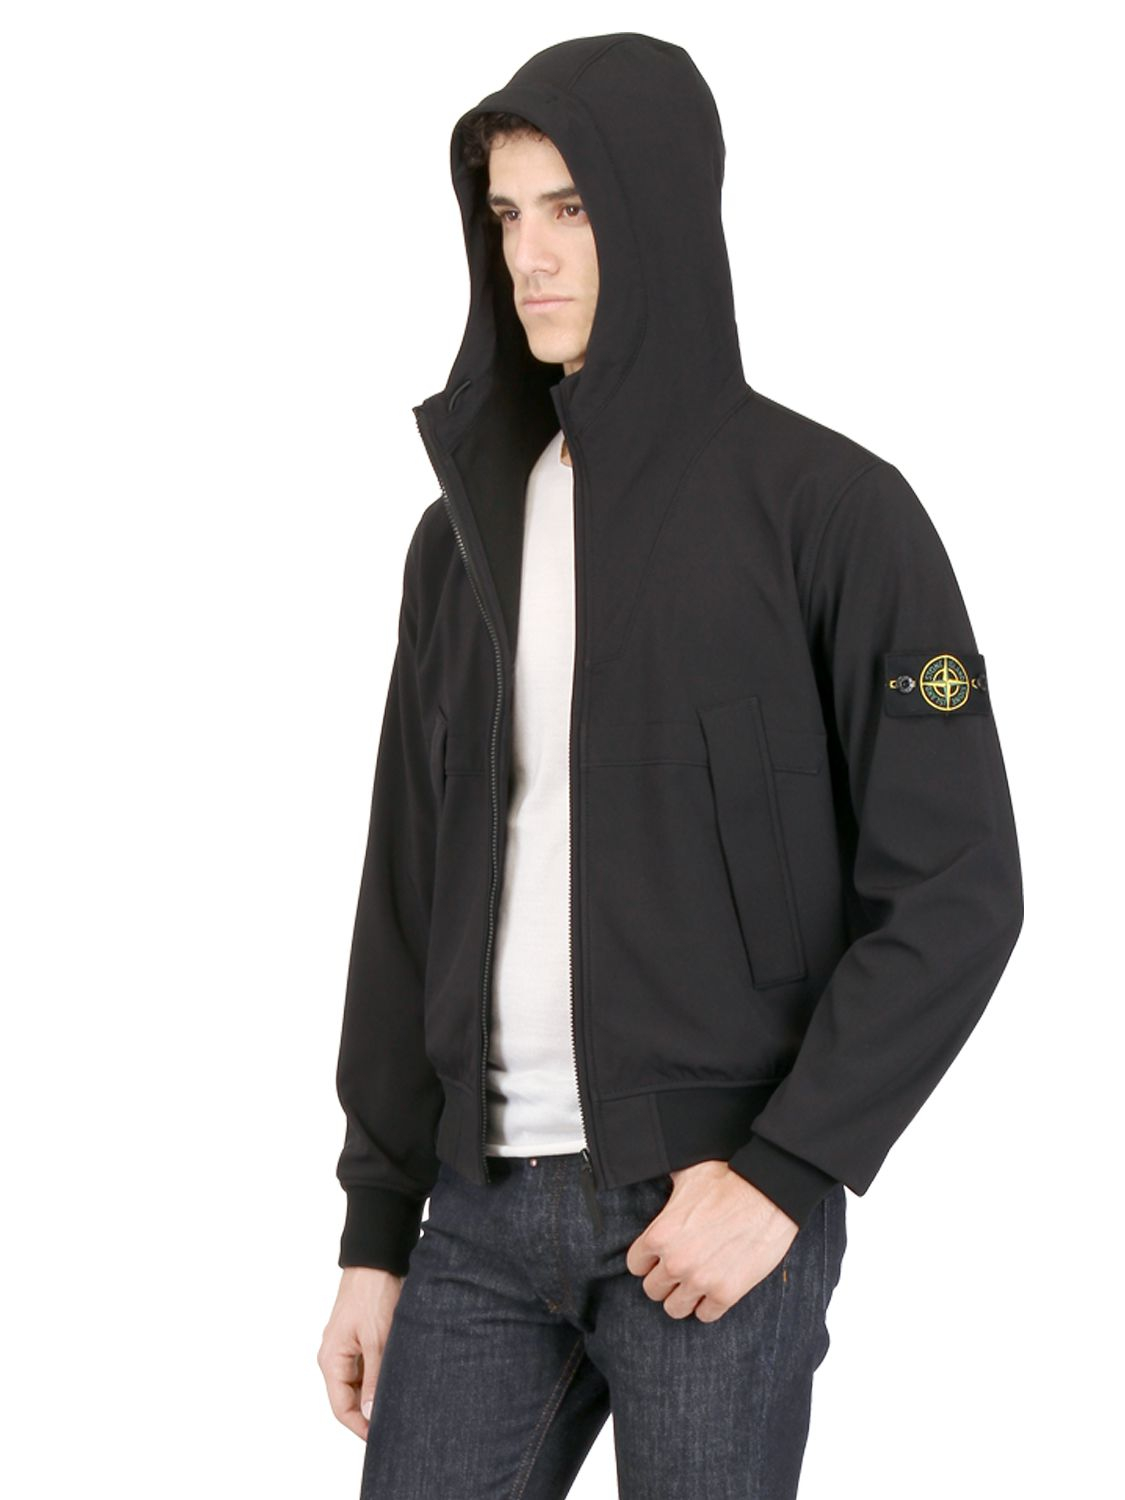 Parity > stone island shell jacket sale, Up to 70% OFF